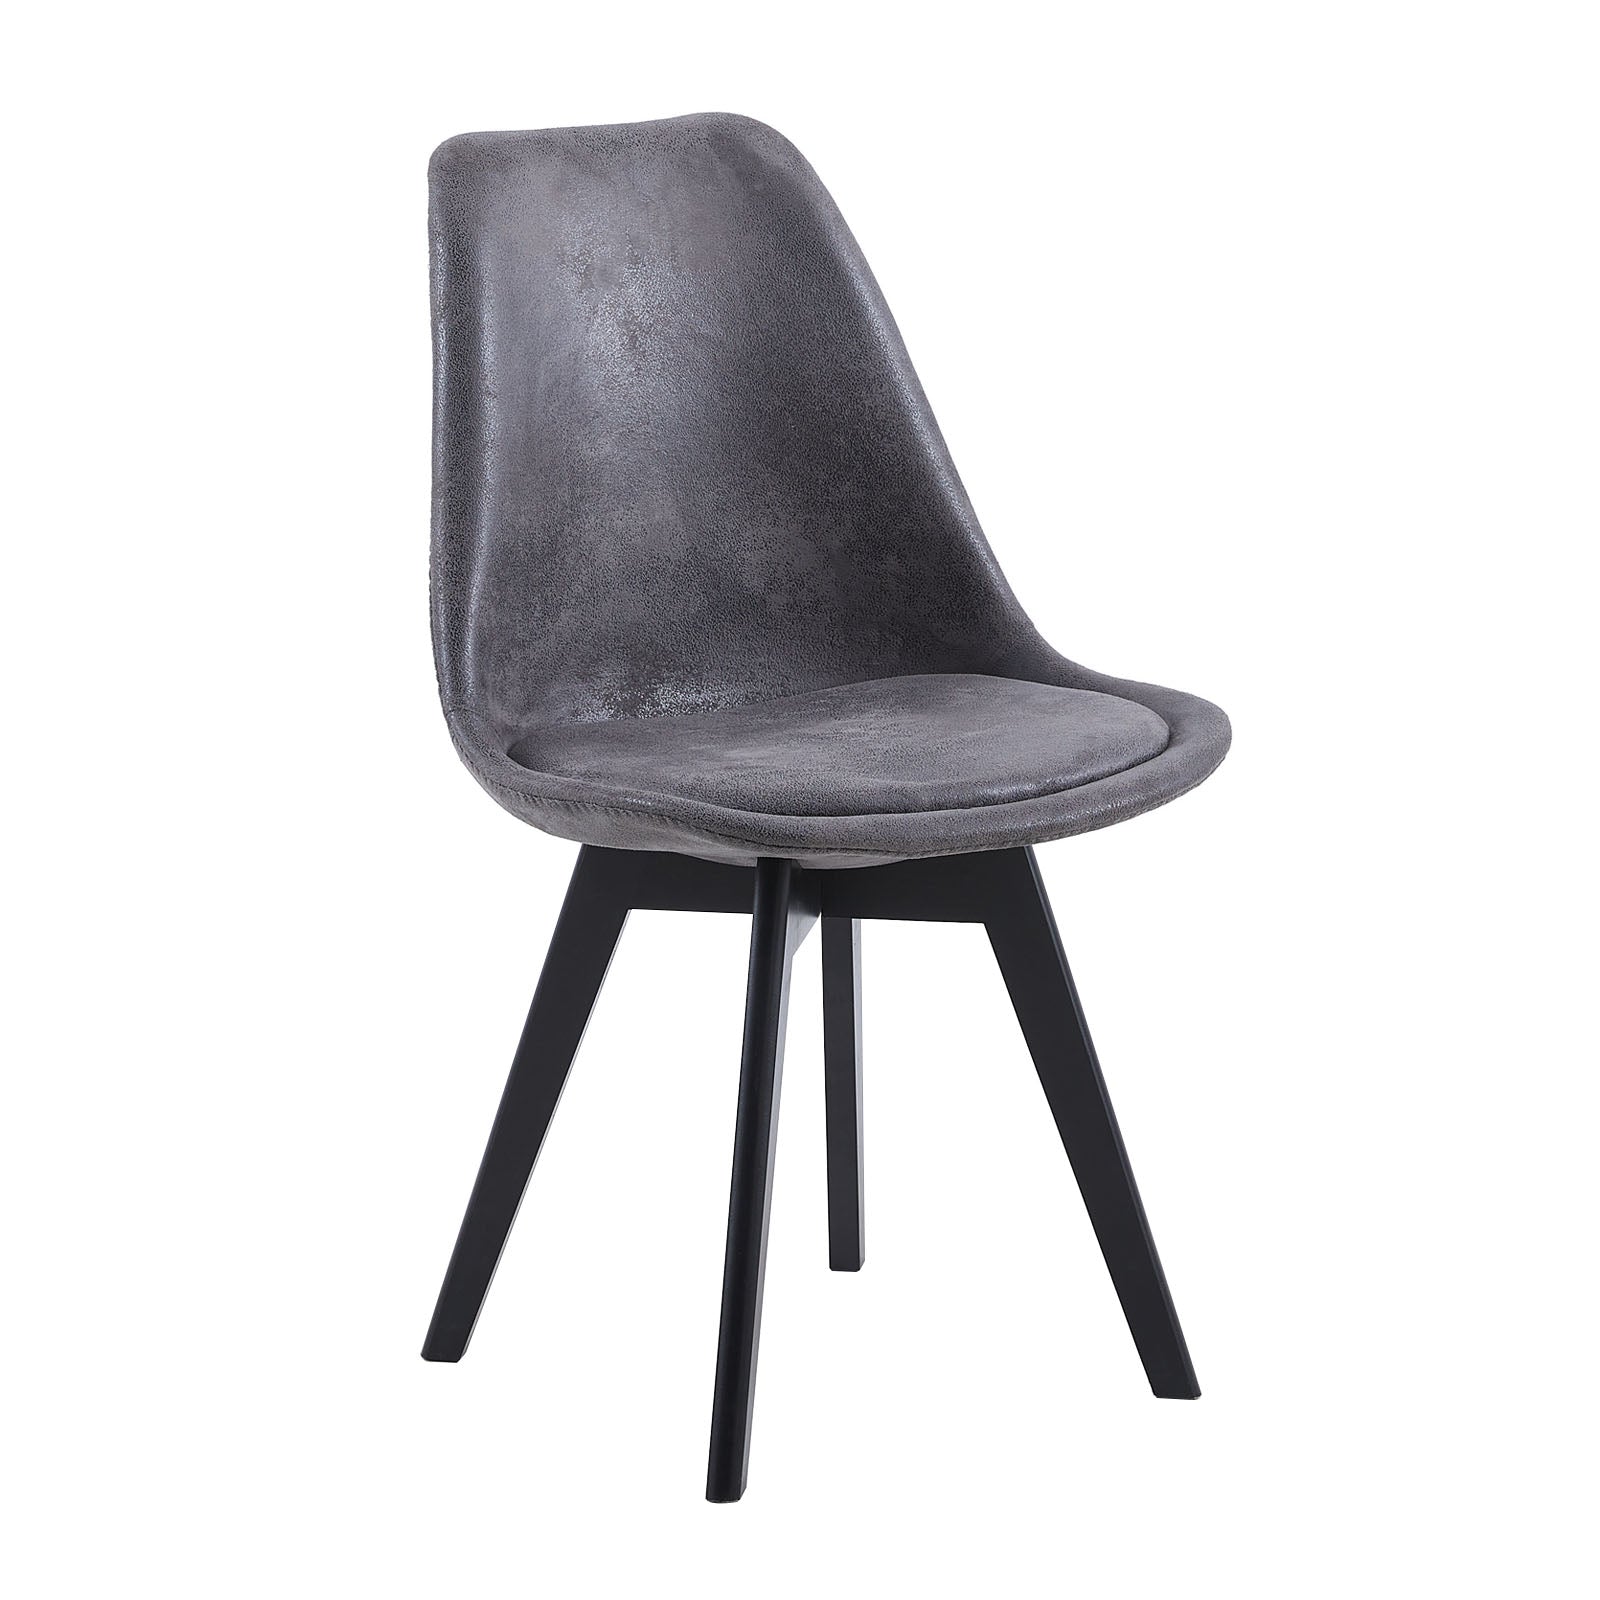 TULIP Suede Dining Chairs Retro Design Upholstered Chair with Black Beech Legs - Dark Grey/Brown